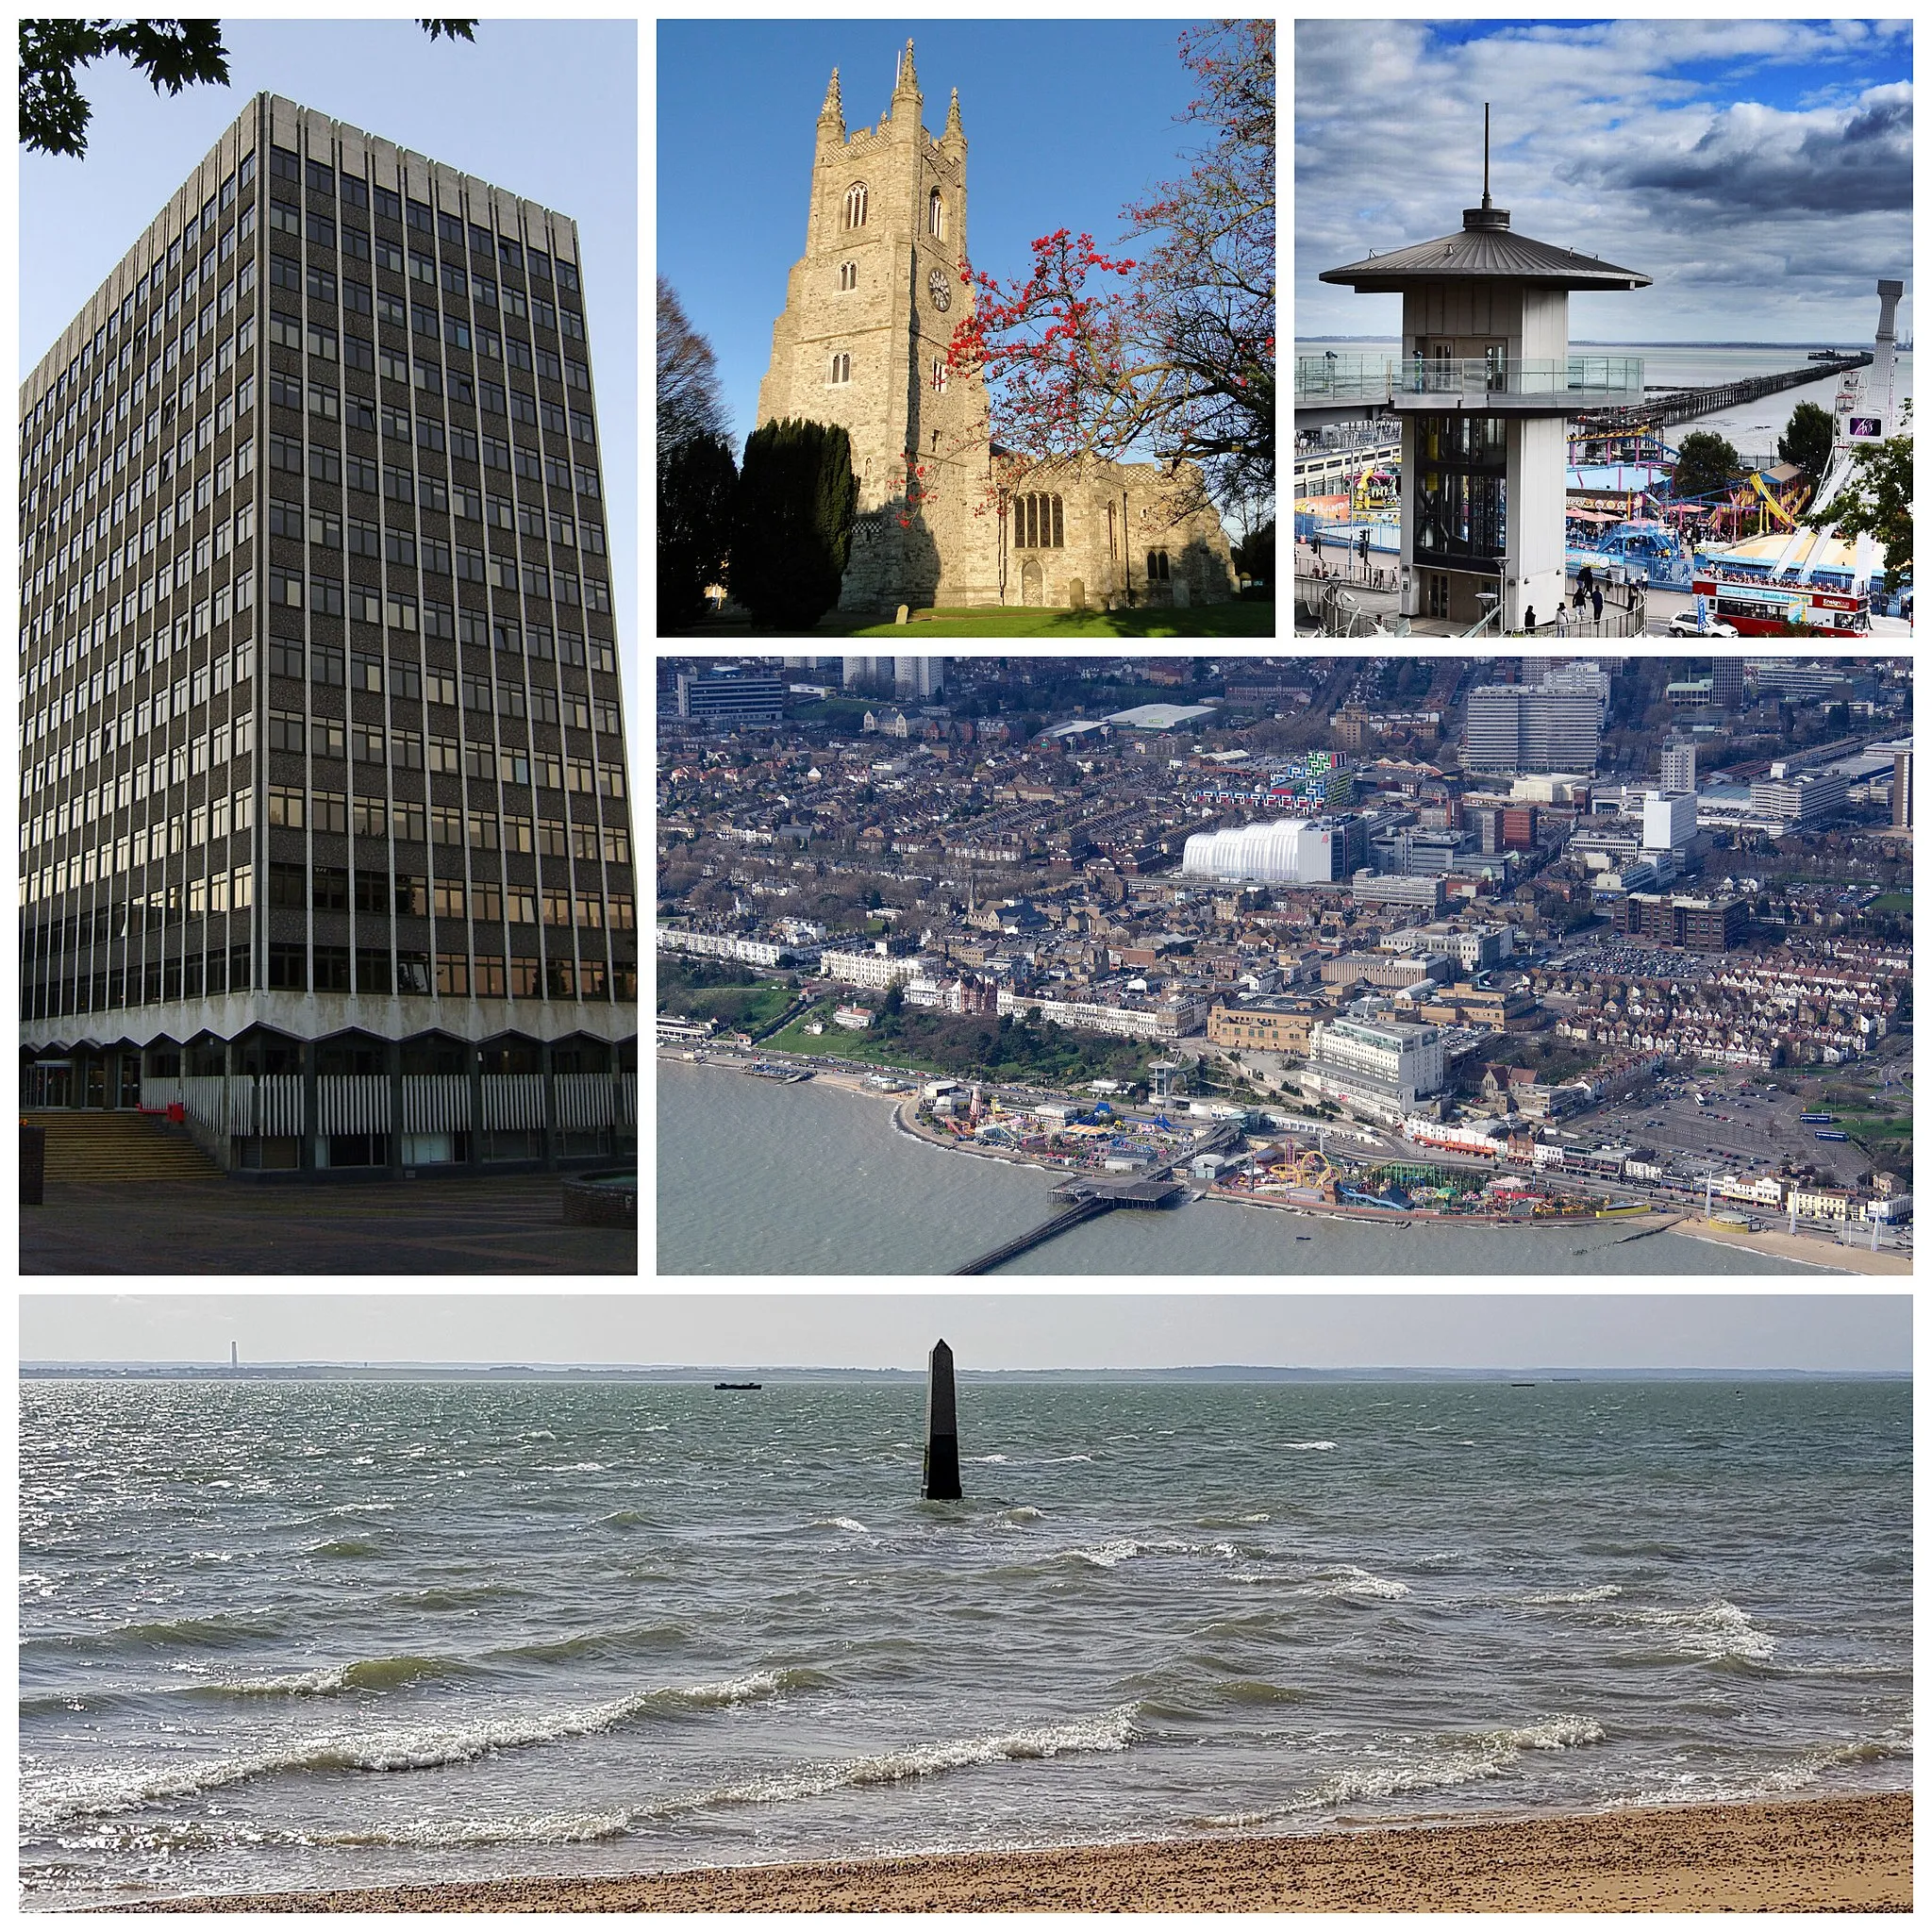 Photo showing: == Summary ==

DescriptionSouthend-on-Sea Collage 2022.jpg

Clockwise from top left: Southend Civic Centre, St Marys Church, Southend Pier, Southend-on-Sea City aerial view, and the Crowstone
Date

14:11, 04 September 2022
Source

Derived from (File: Southend - Civic Centre.jpg), (Prittlewell, Essex - St.Marys Church.jpg), (File:Southend pier, with lift providing access.jpg), (Southend aerial image - on the coast of Essex UK (13497304904).jpg) and (File:The Crowstone 20180314 122134 (48823012447).jpg),
Author

Damian Dukarski (File:Southend - Civic Centre.jpg) Lonpicman (Prittlewell, Essex - St.Marys Church.jpg) srfurley (File:Southend pier, with lift providing access.jpg) Irid Escent (File:The Crowstone 20180314 122134 (48823012447).jpg) John Fielding from Norwich, UK (Southend aerial image - on the coast of Essex UK (13497304904).jpg)